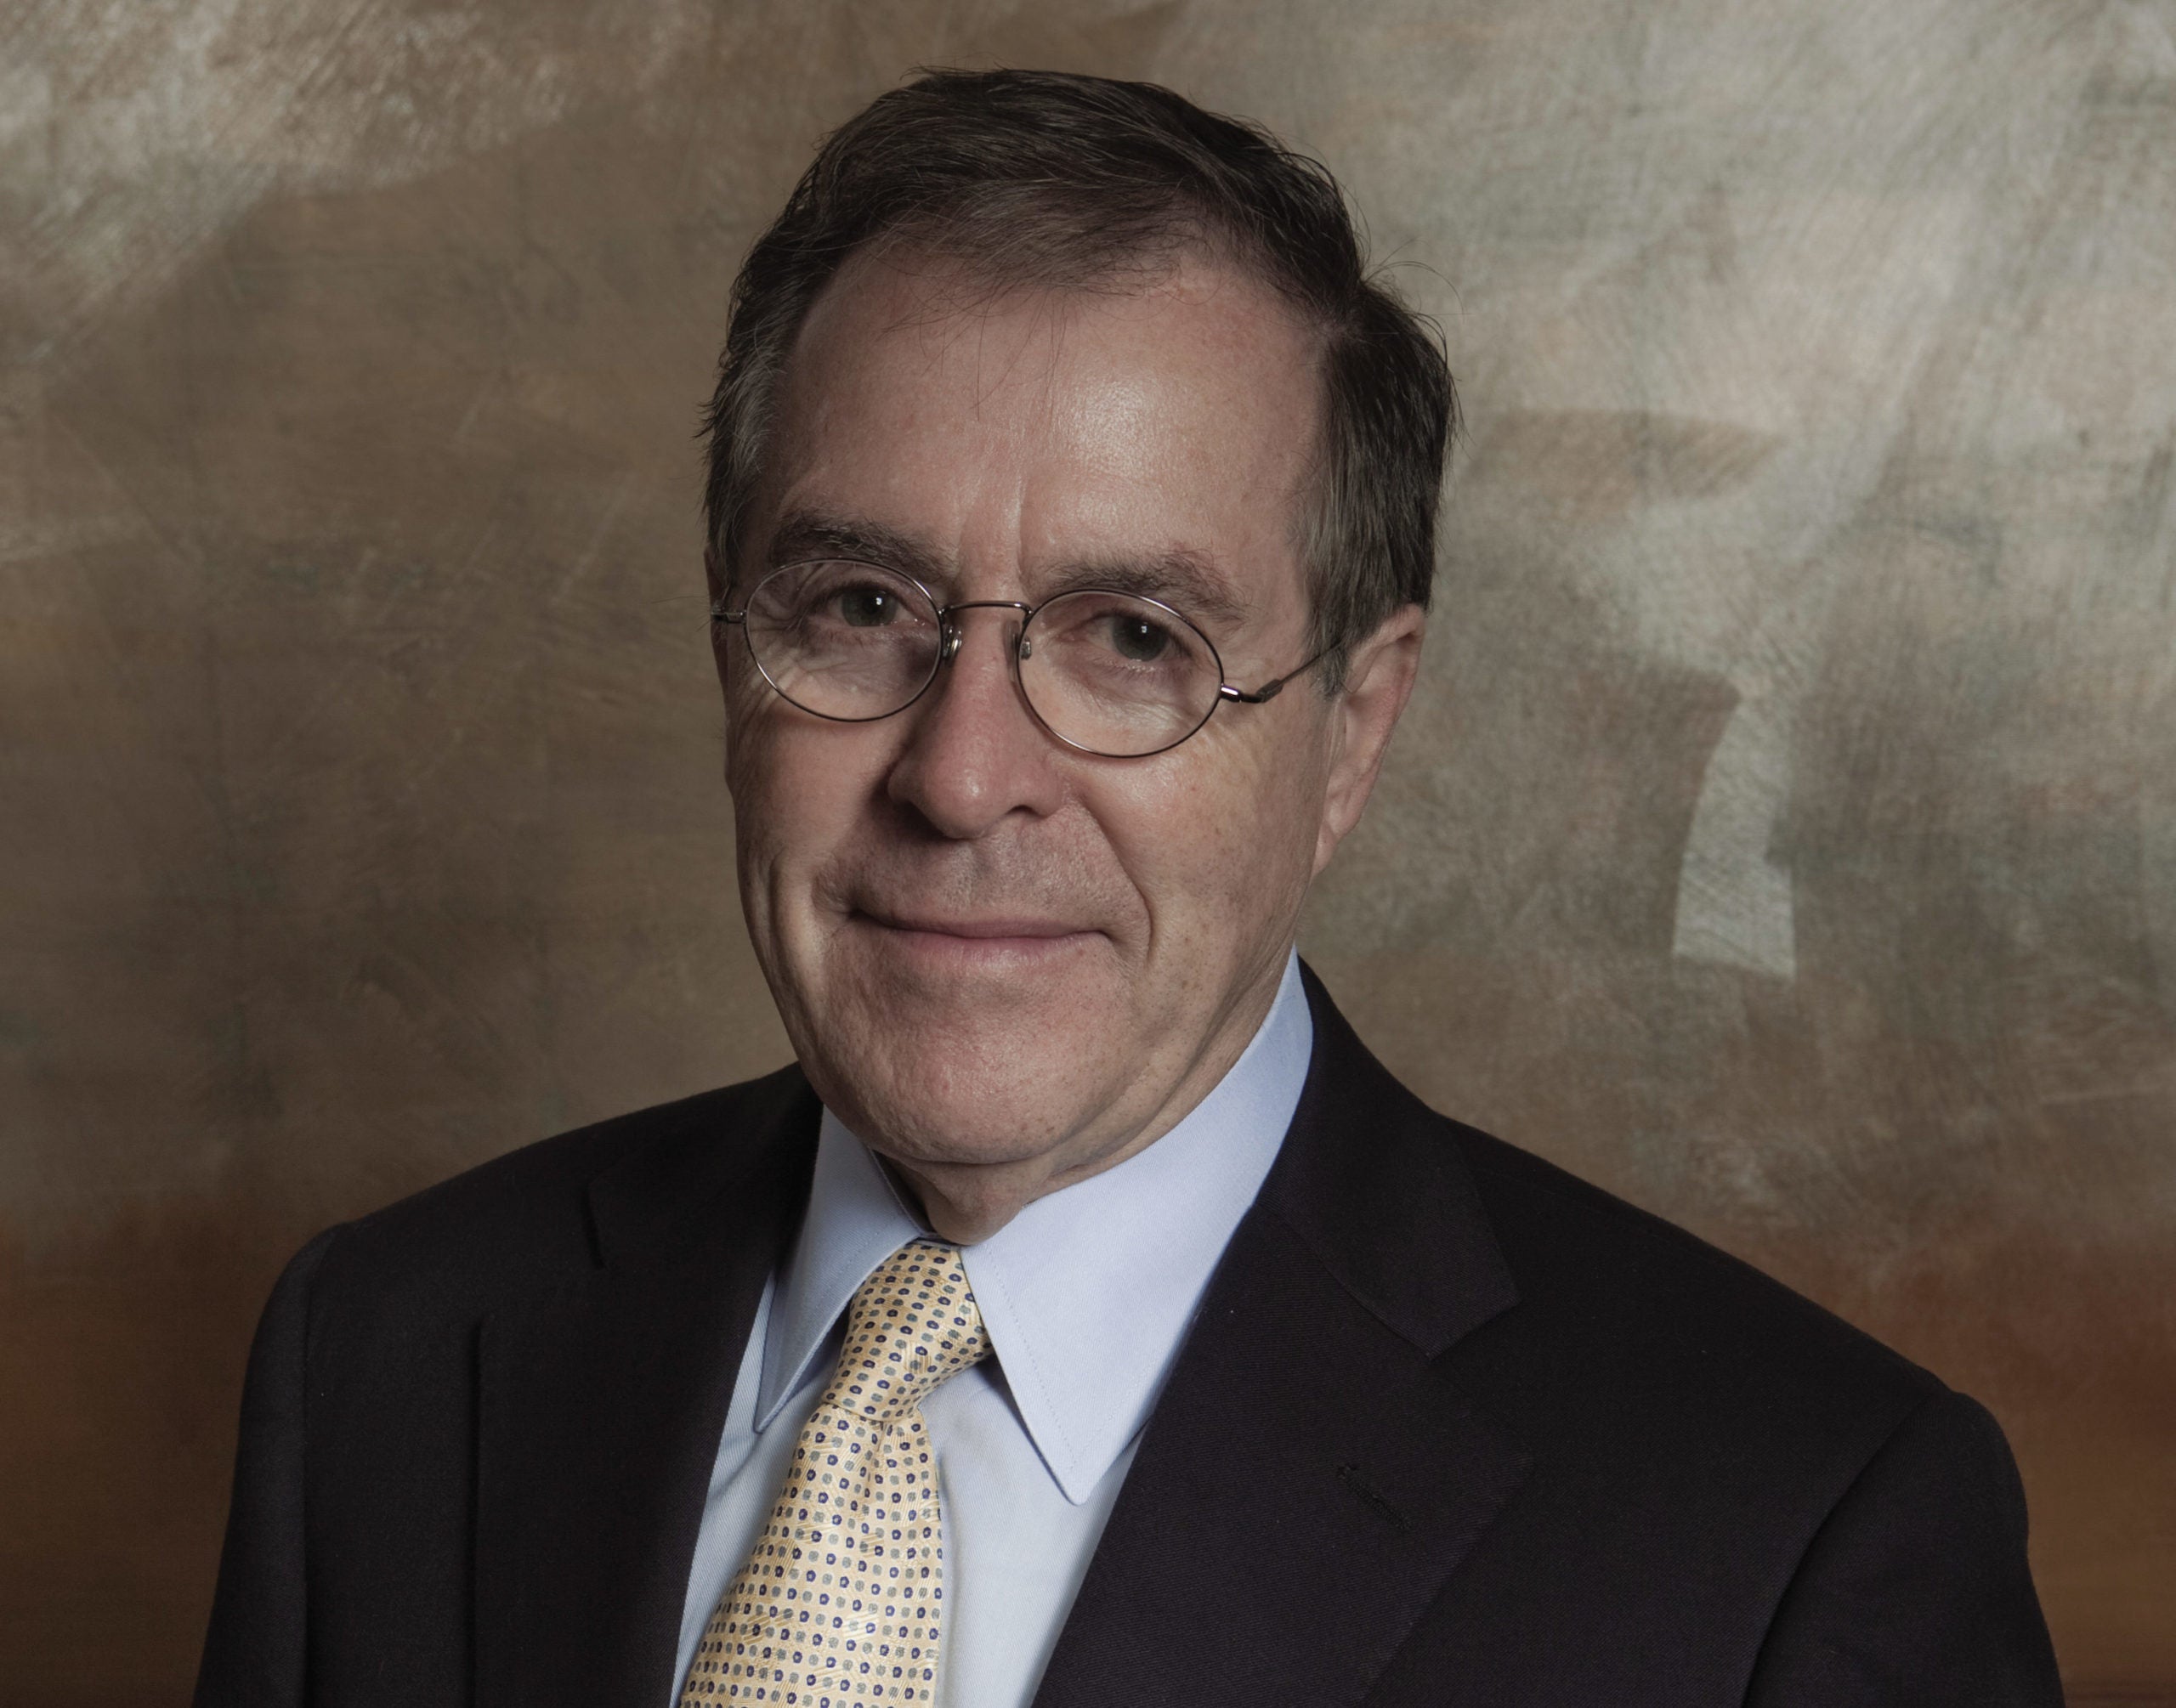 Horst Schulze, Co-Founder of The Ritz-Carlton, On Maintaining Excellence